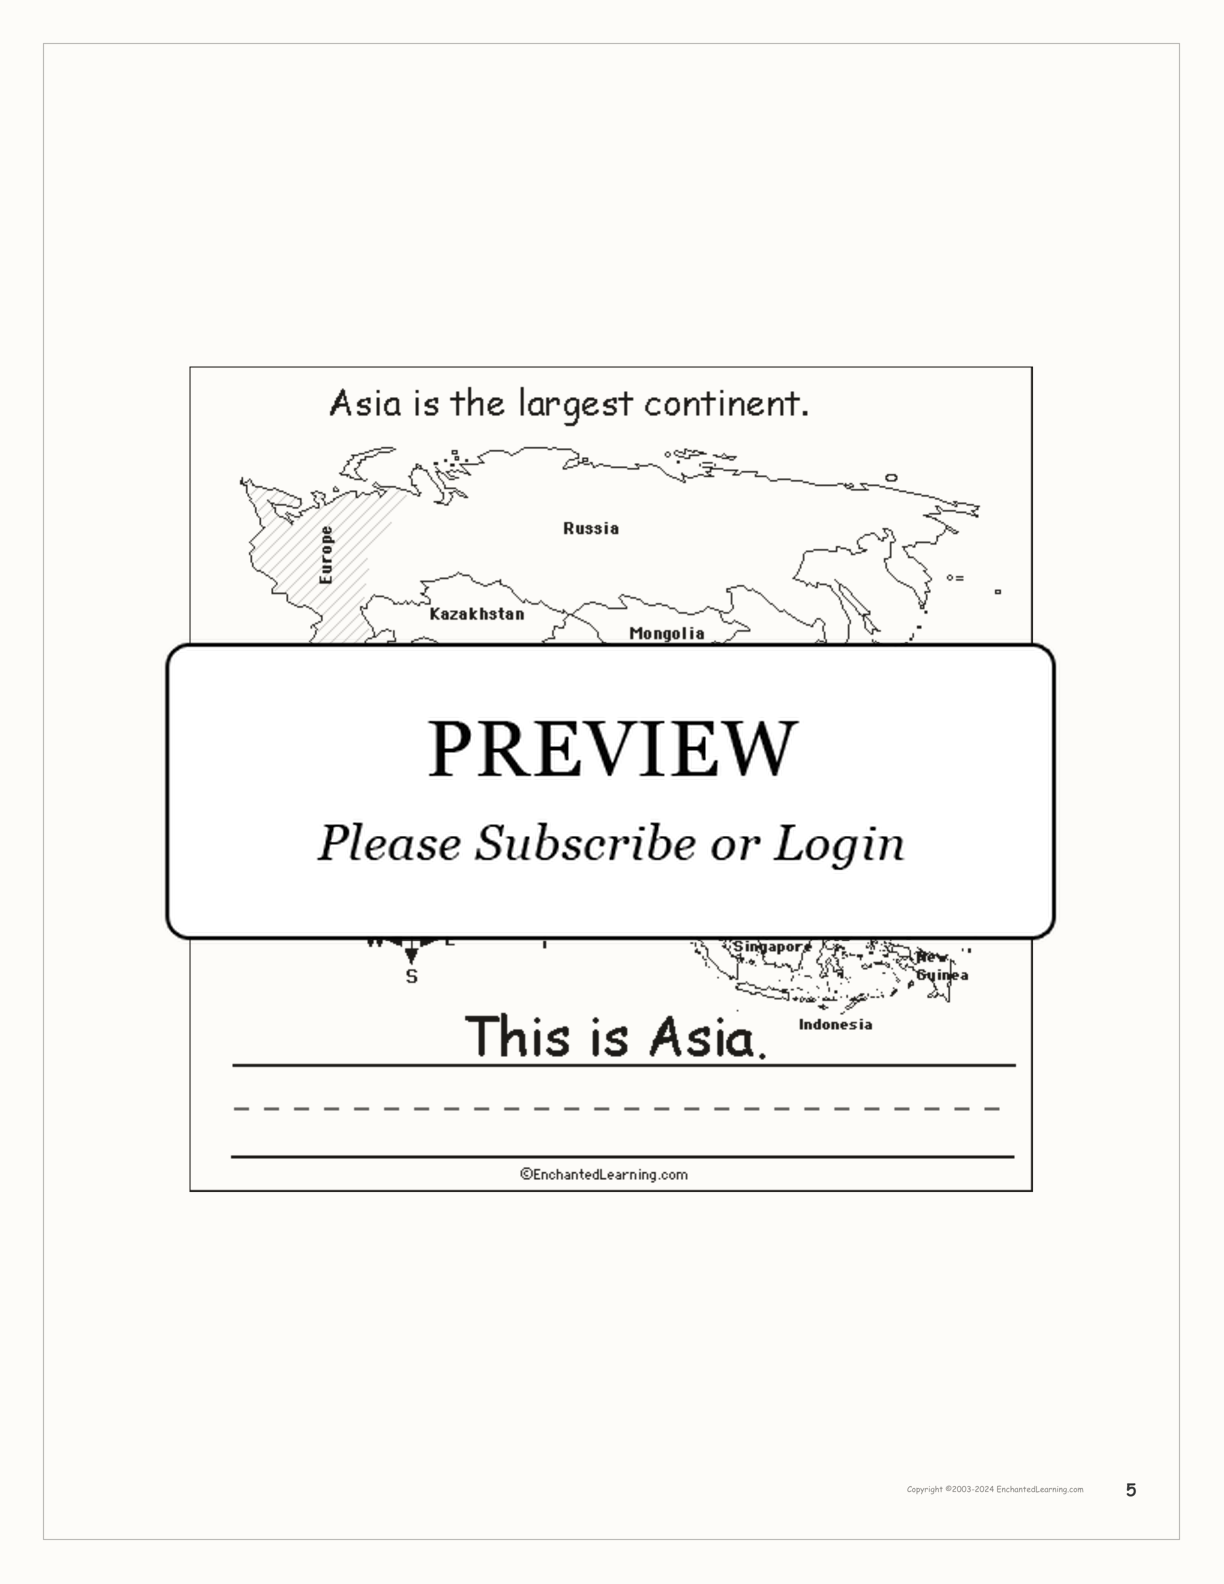 The Seven Continents Book interactive printout page 5